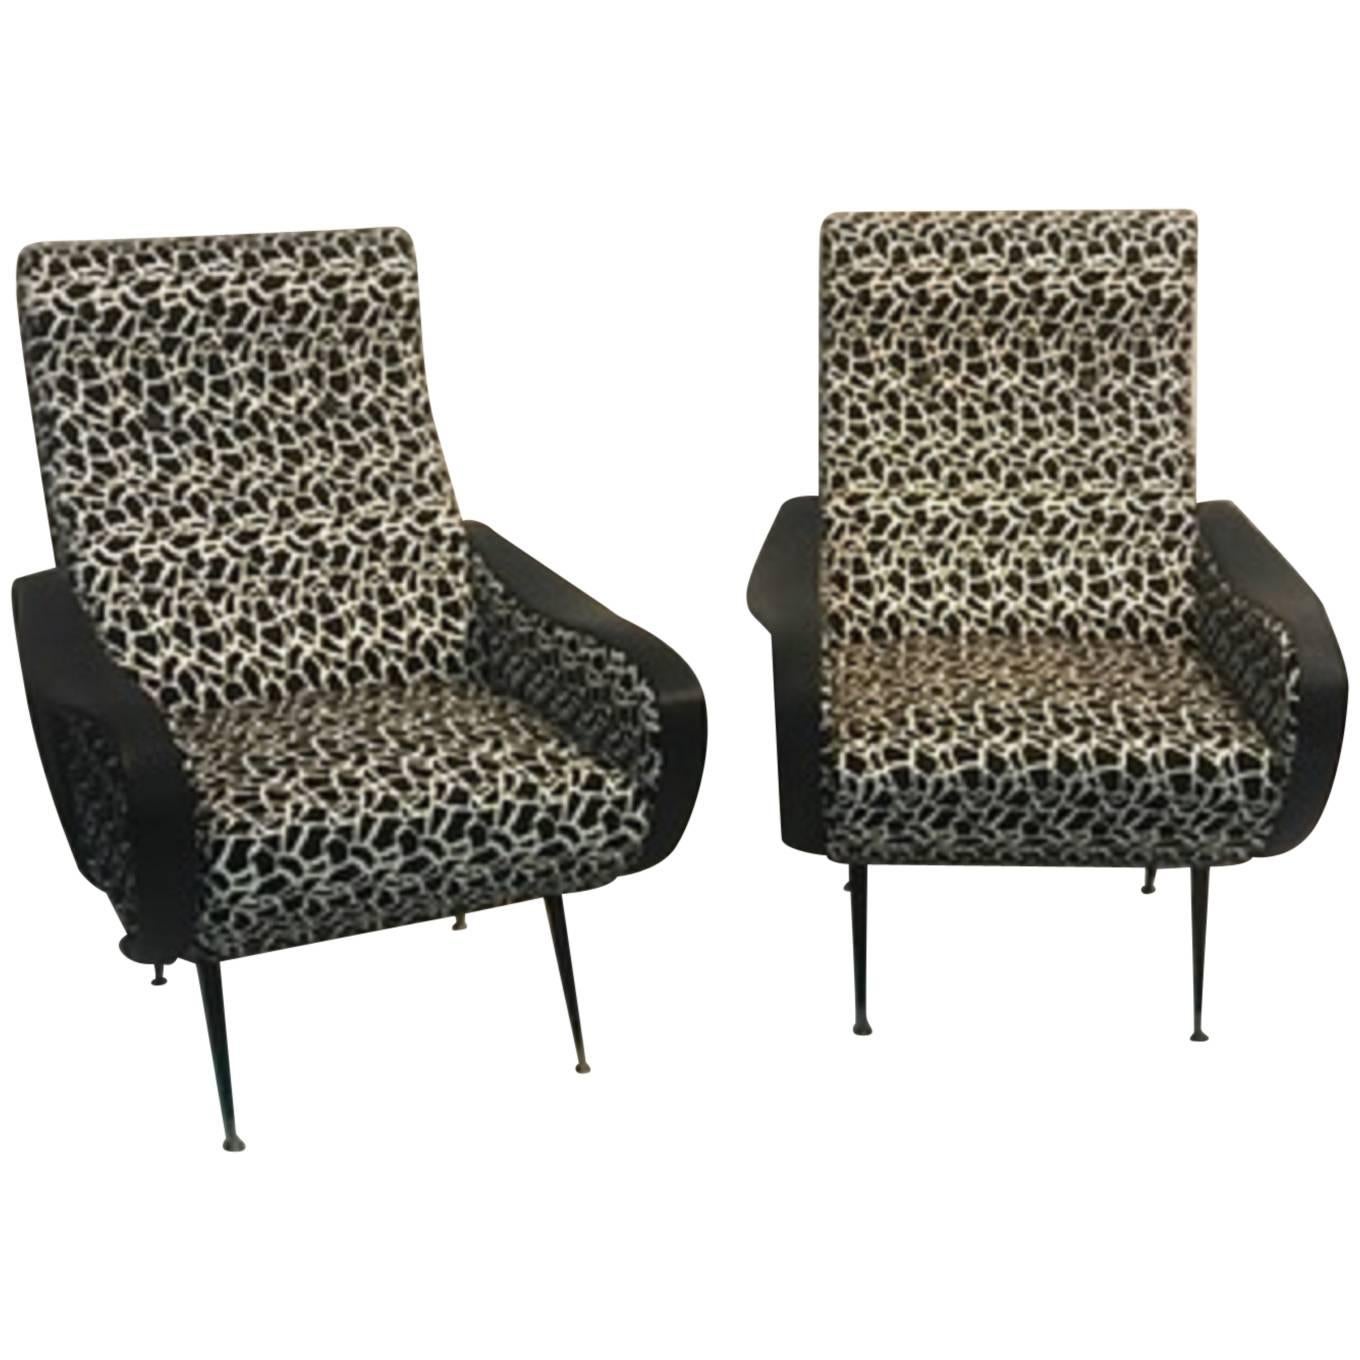 Magnificent Pair of Italian Lounge Chairs in the Manner of Marco Zanuso